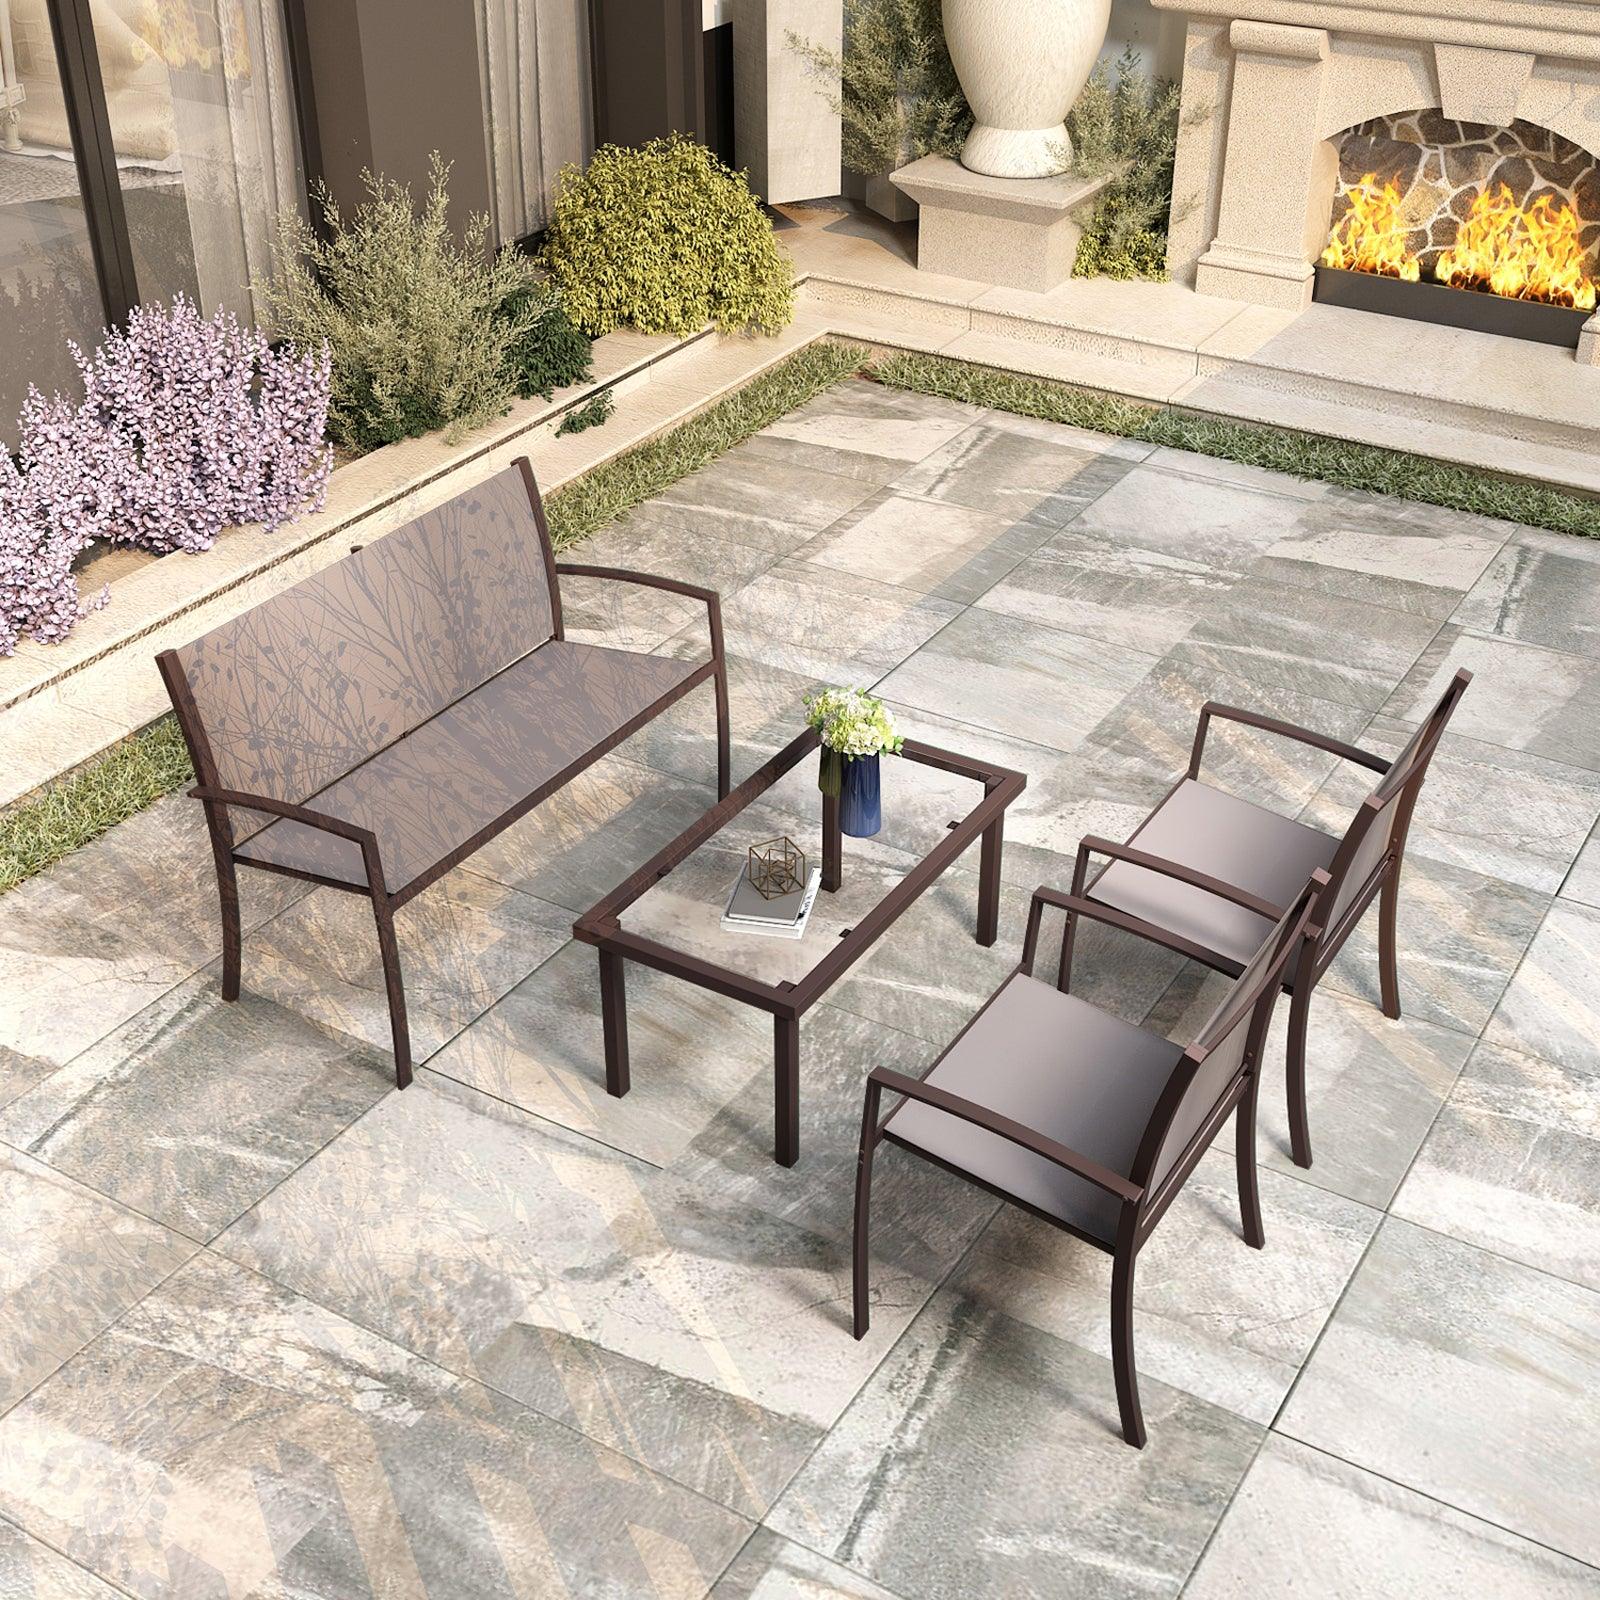 Brown Garden Furniture 4 Piece Set - Glass Coffee Table, 2 Textilene Armchairs, 1 Double Seat Sofa - Charming Spaces